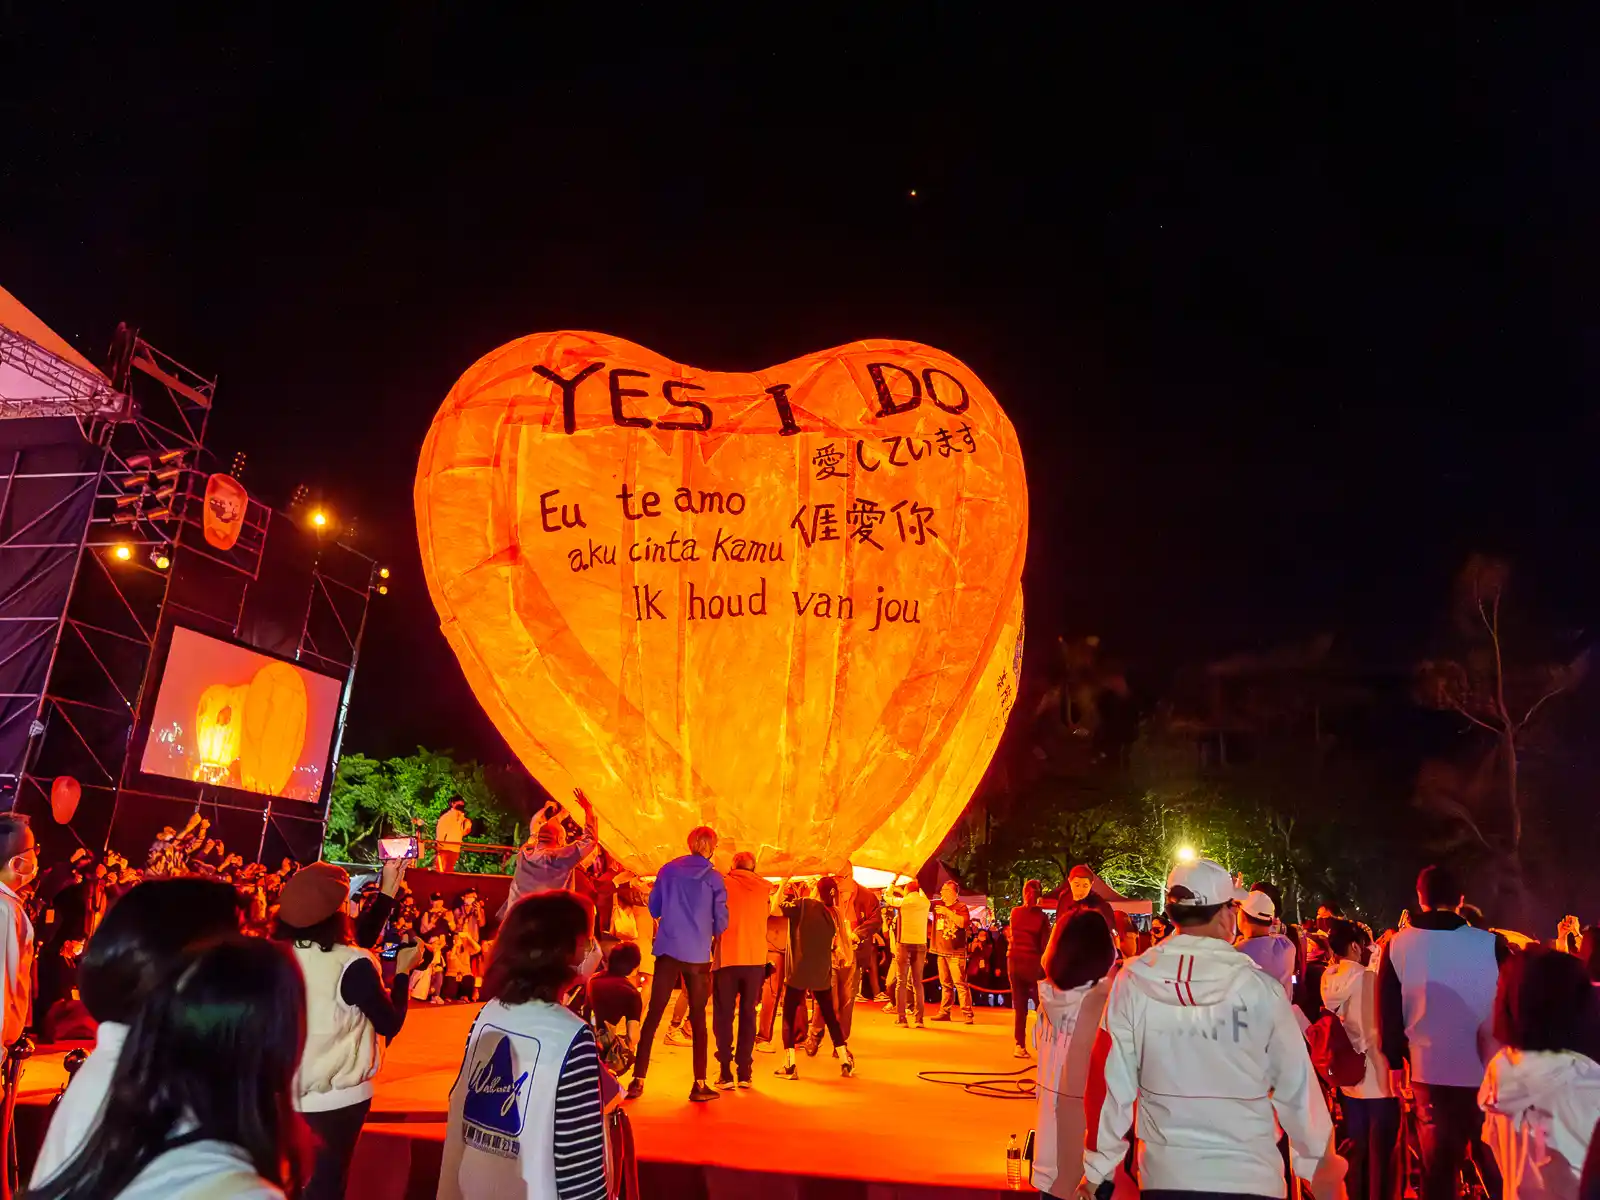 One of the large heart-shaped special event lanterns is being held down before release.